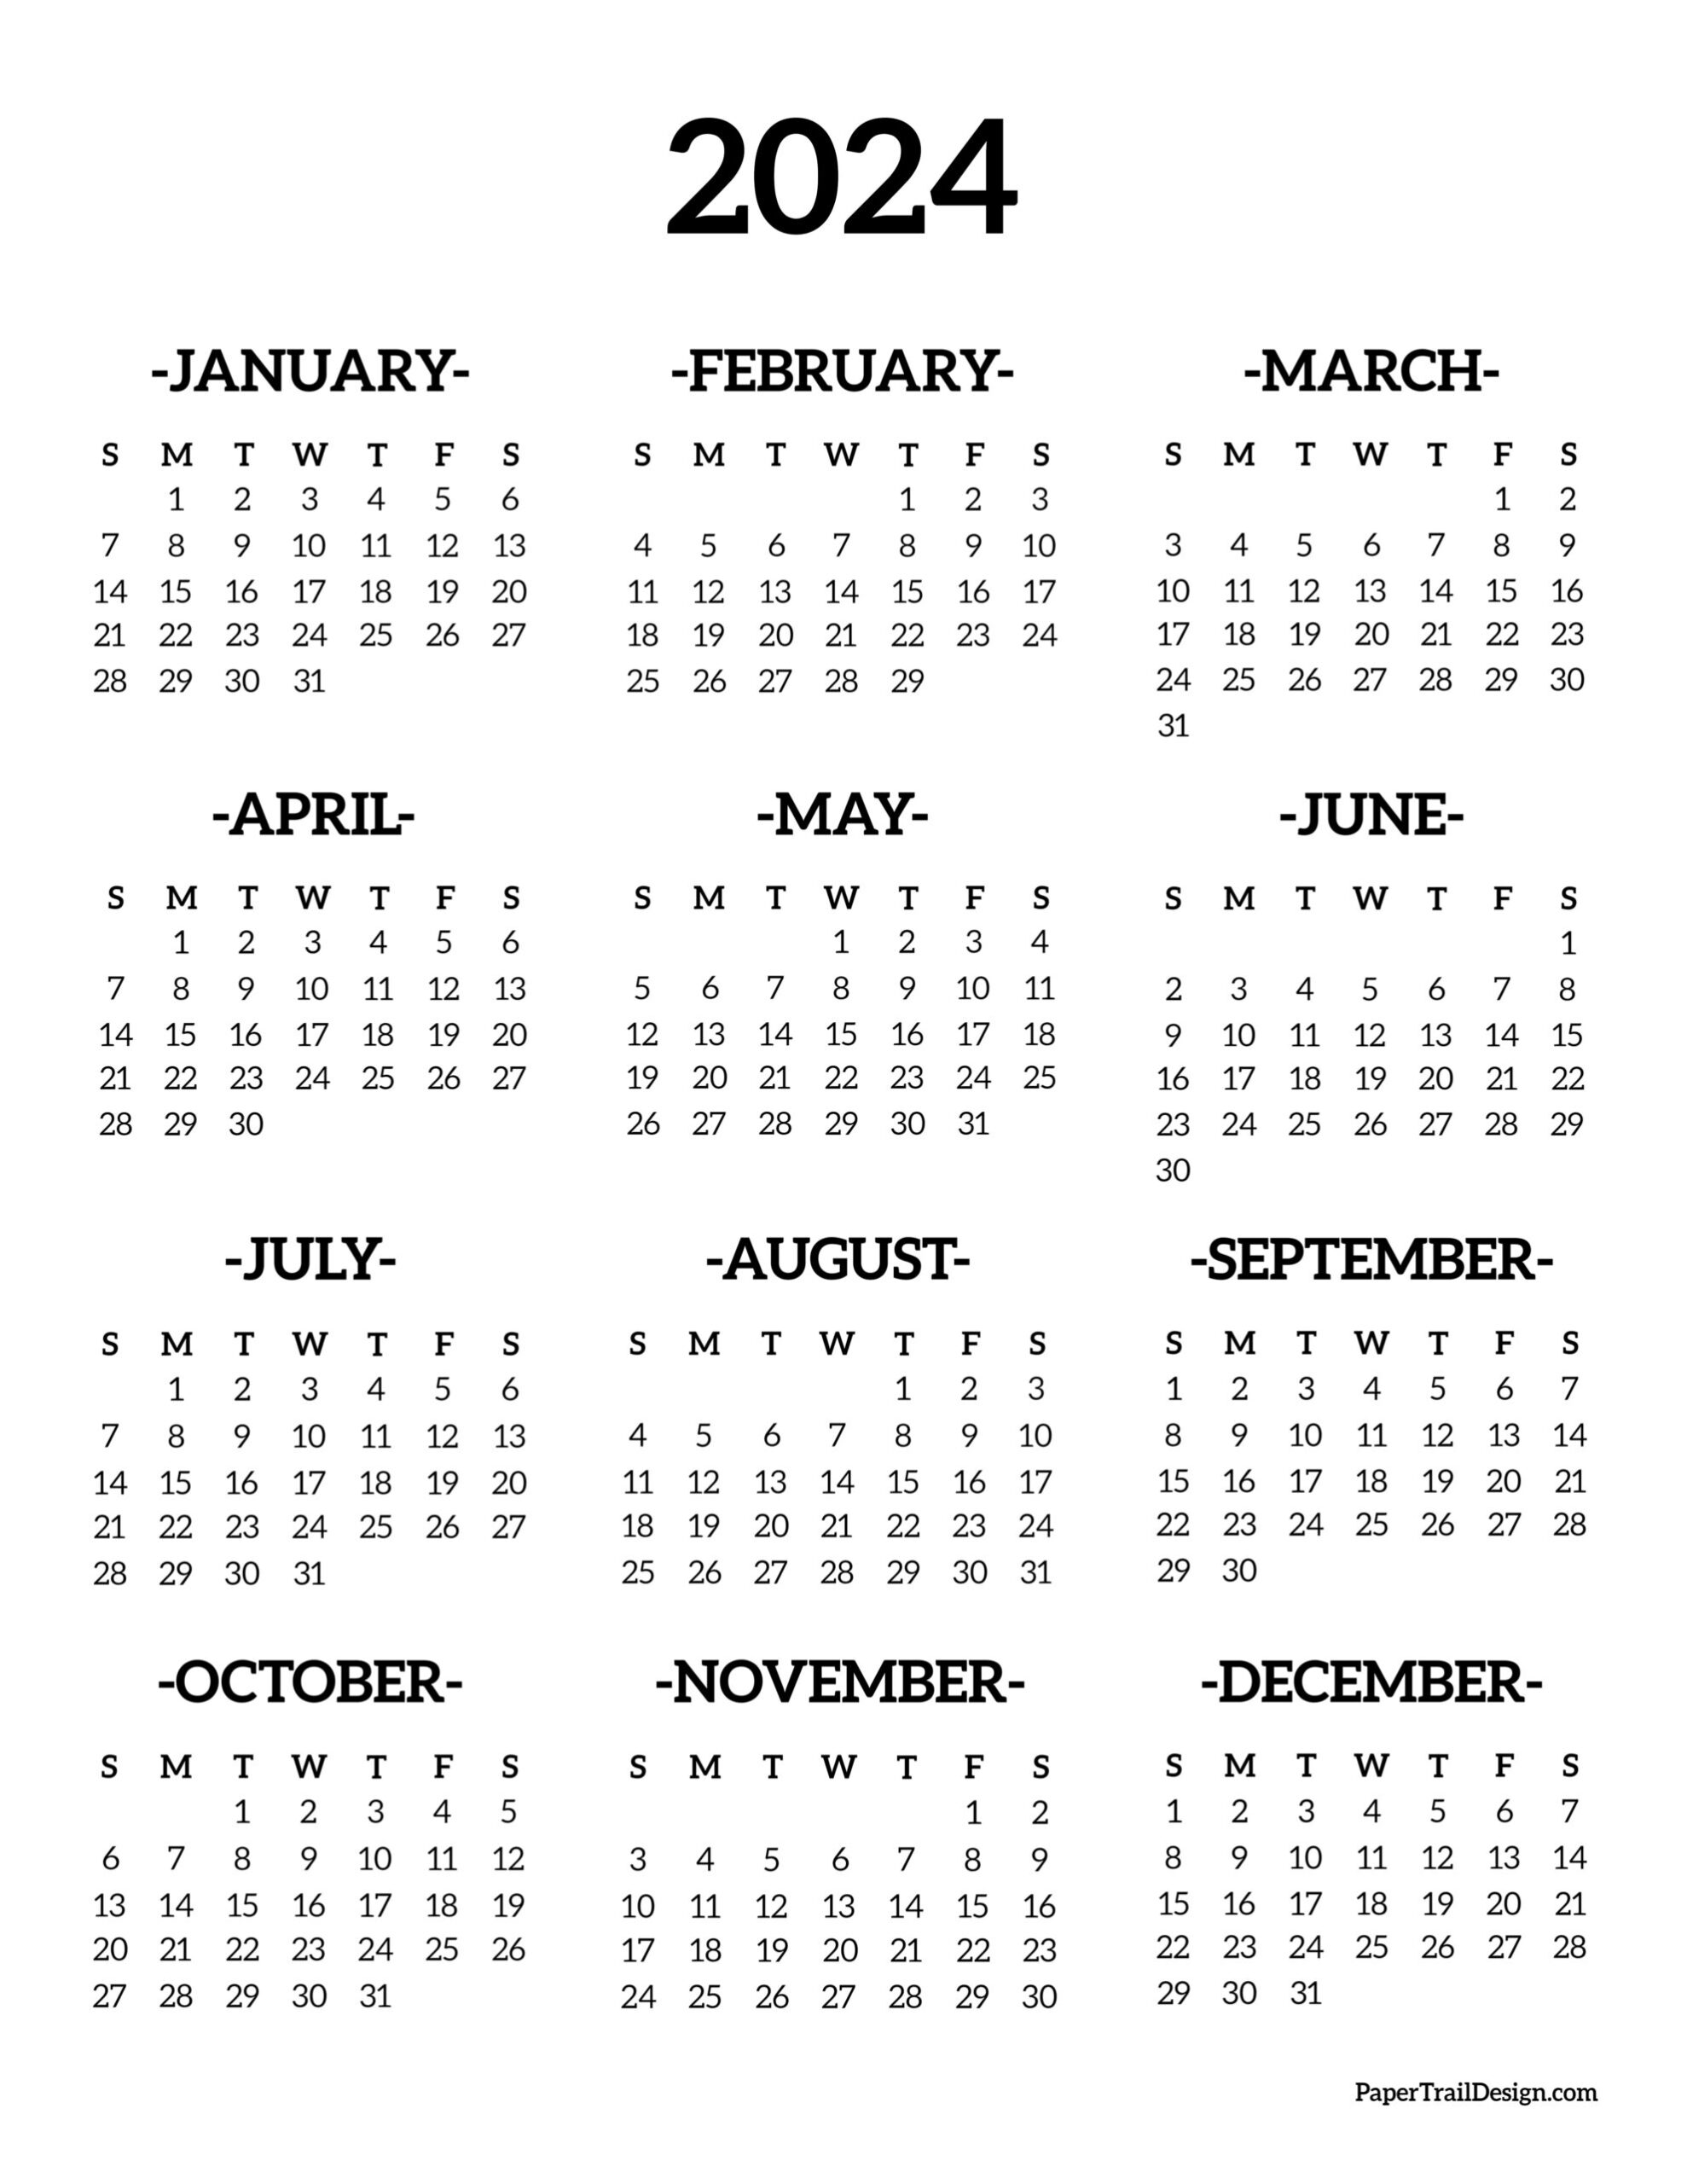 Calendar 2024 Printable One Page - Paper Trail Design for Free Yearly Printable Calendar 2024